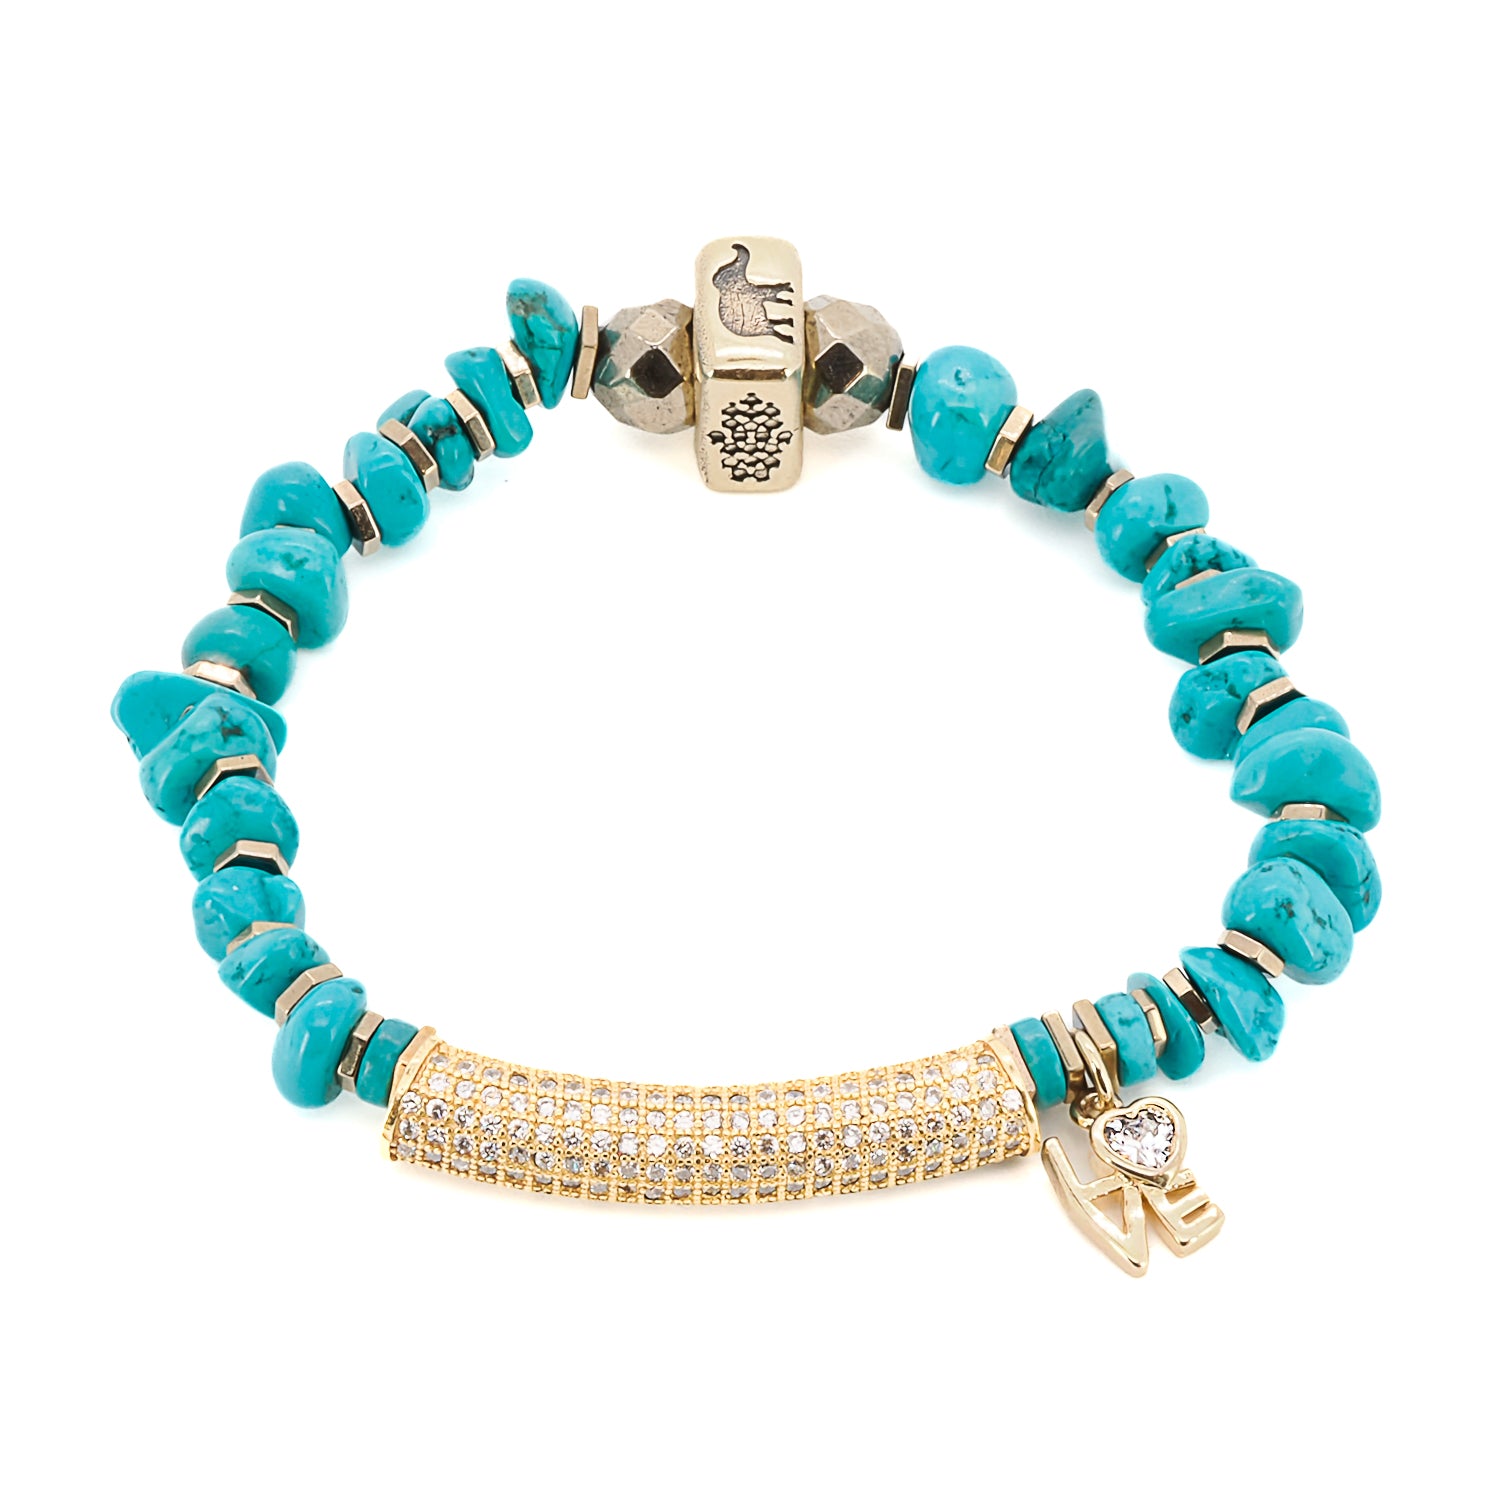 The Diamond and Turquoise Love Bracelet is a beautiful piece of jewelry that is perfect for anyone who wants to express their love and protection for someone special